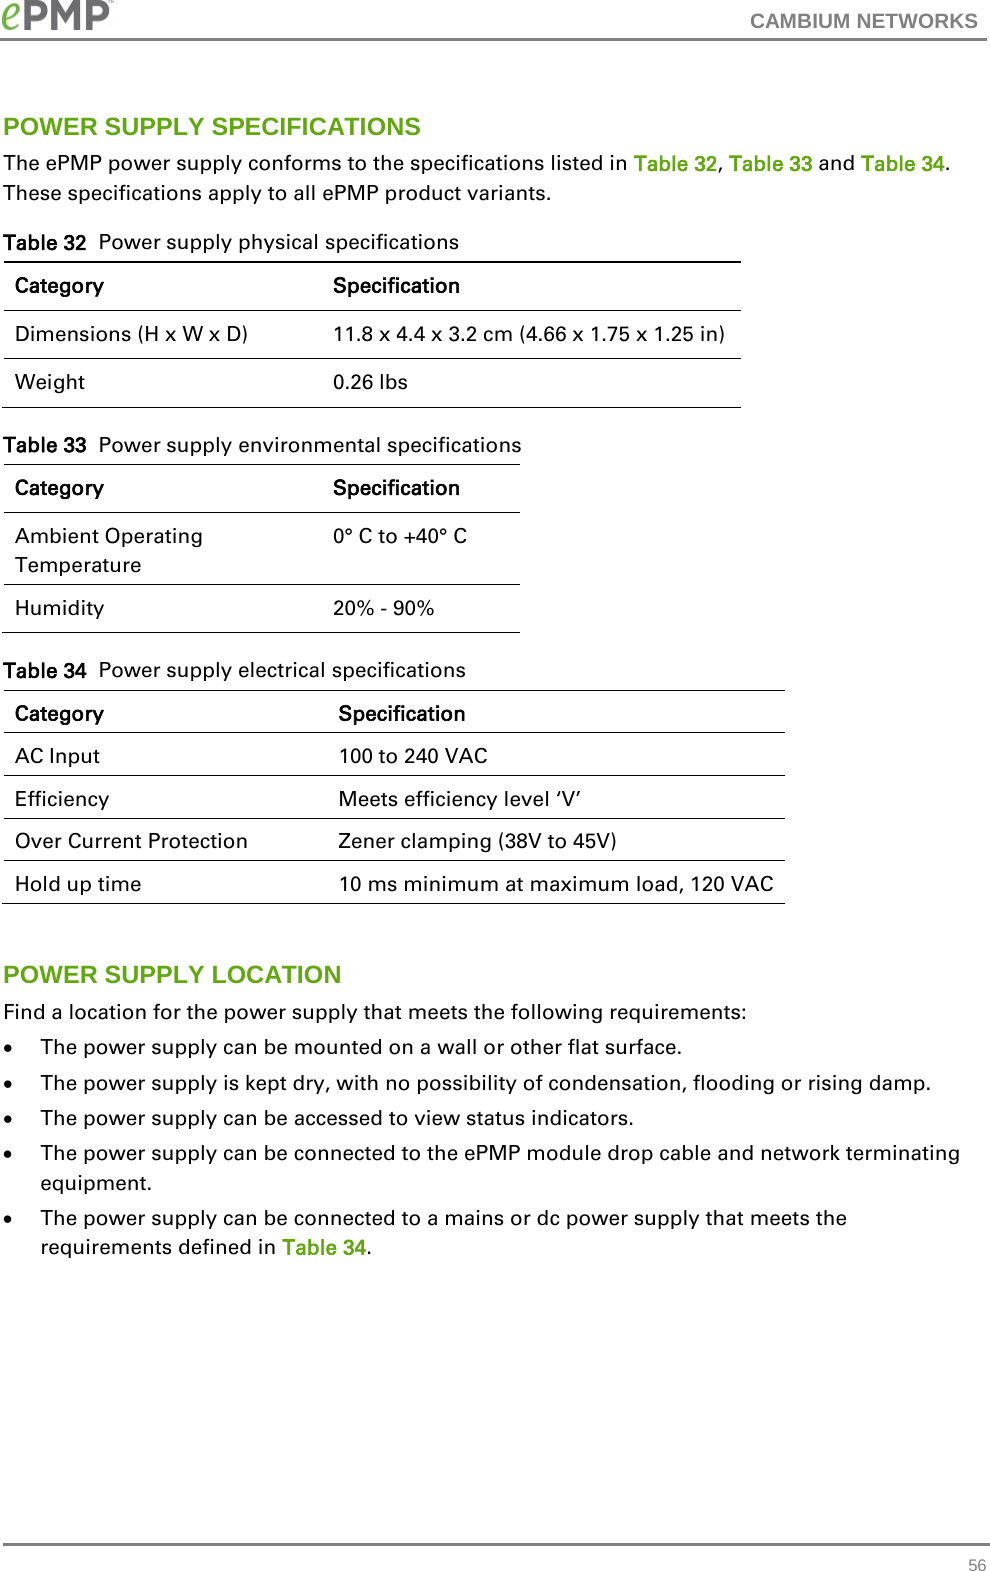 CAMBIUM NETWORKS  POWER SUPPLY SPECIFICATIONS The ePMP power supply conforms to the specifications listed in Table 32, Table 33 and Table 34.  These specifications apply to all ePMP product variants. Table 32  Power supply physical specifications Category Specification Dimensions (H x W x D) 11.8 x 4.4 x 3.2 cm (4.66 x 1.75 x 1.25 in) Weight  0.26 lbs Table 33  Power supply environmental specifications Category Specification Ambient Operating Temperature  0° C to +40° C Humidity  20% - 90% Table 34  Power supply electrical specifications Category Specification AC Input 100 to 240 VAC Efficiency Meets efficiency level ‘V’ Over Current Protection Zener clamping (38V to 45V) Hold up time  10 ms minimum at maximum load, 120 VAC  POWER SUPPLY LOCATION Find a location for the power supply that meets the following requirements: • The power supply can be mounted on a wall or other flat surface. • The power supply is kept dry, with no possibility of condensation, flooding or rising damp. • The power supply can be accessed to view status indicators. • The power supply can be connected to the ePMP module drop cable and network terminating equipment. • The power supply can be connected to a mains or dc power supply that meets the requirements defined in Table 34.          56 